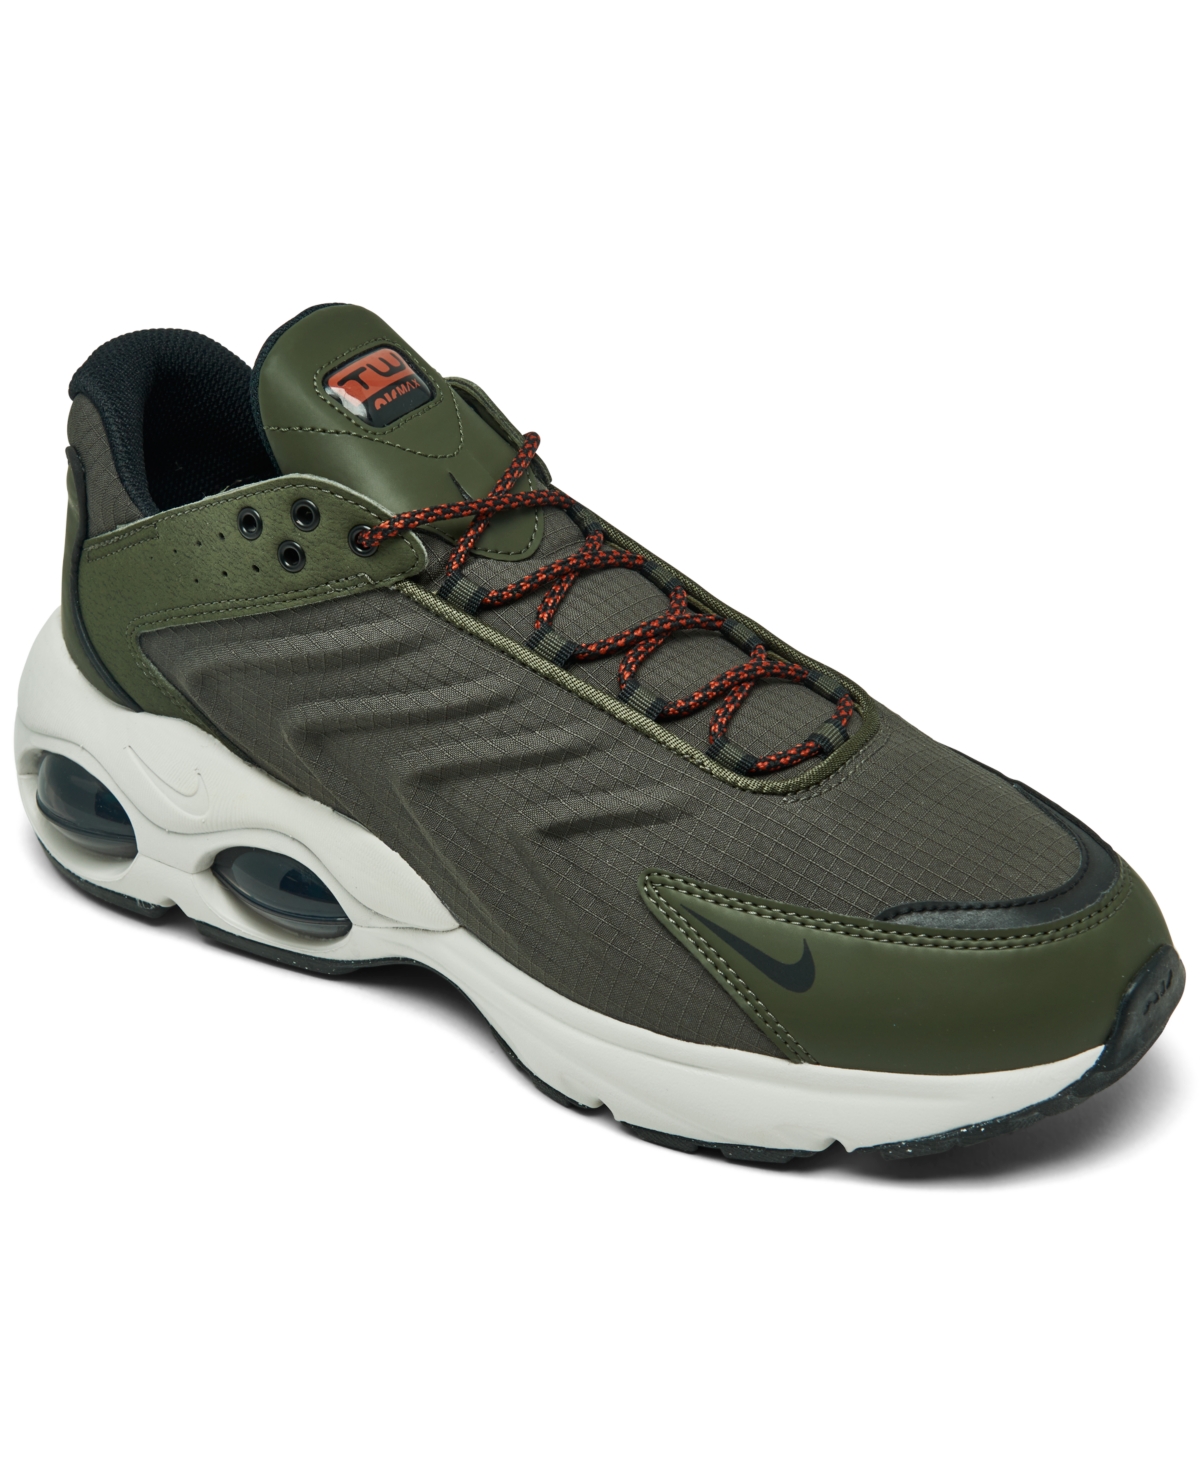 Nike Men's Air Max Tw Casual Sneakers From Finish Line In Cargo Khaki,black